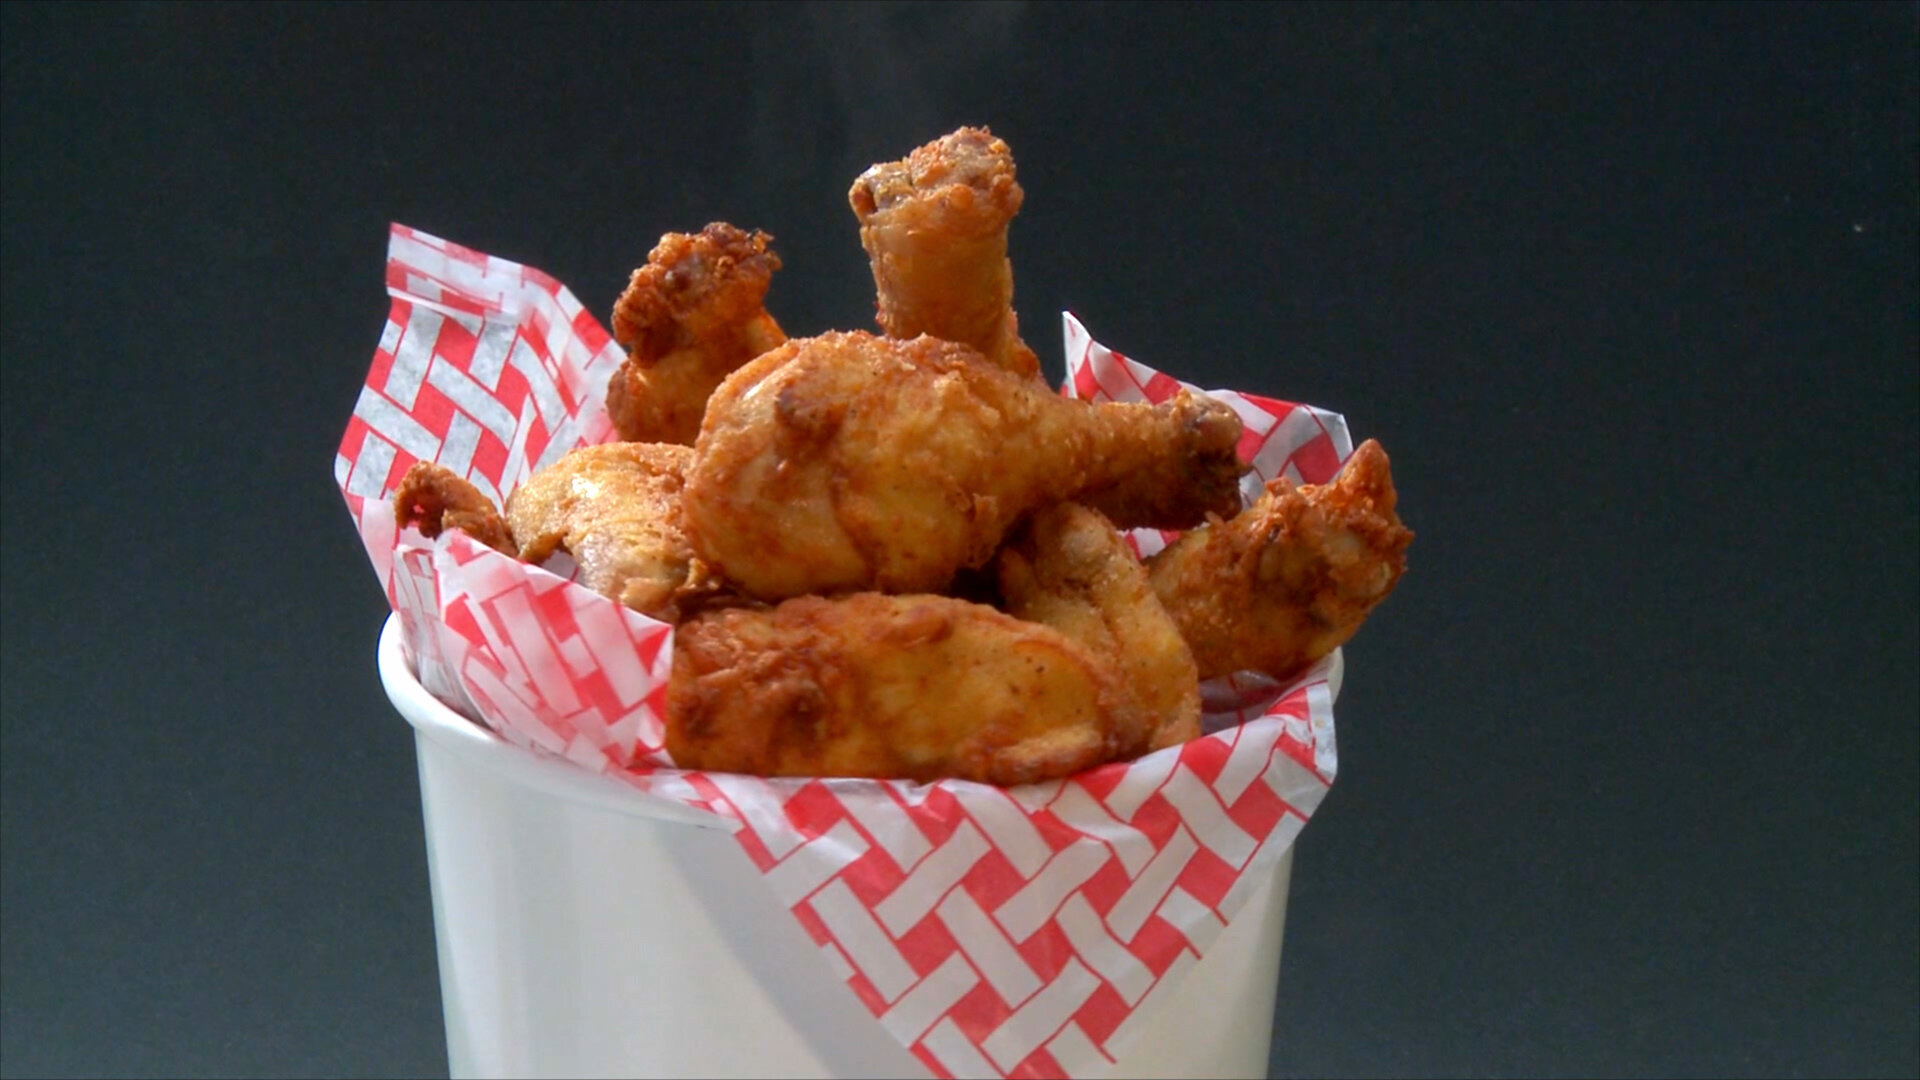 The Food That Built America S2E12 A Game of Chicken